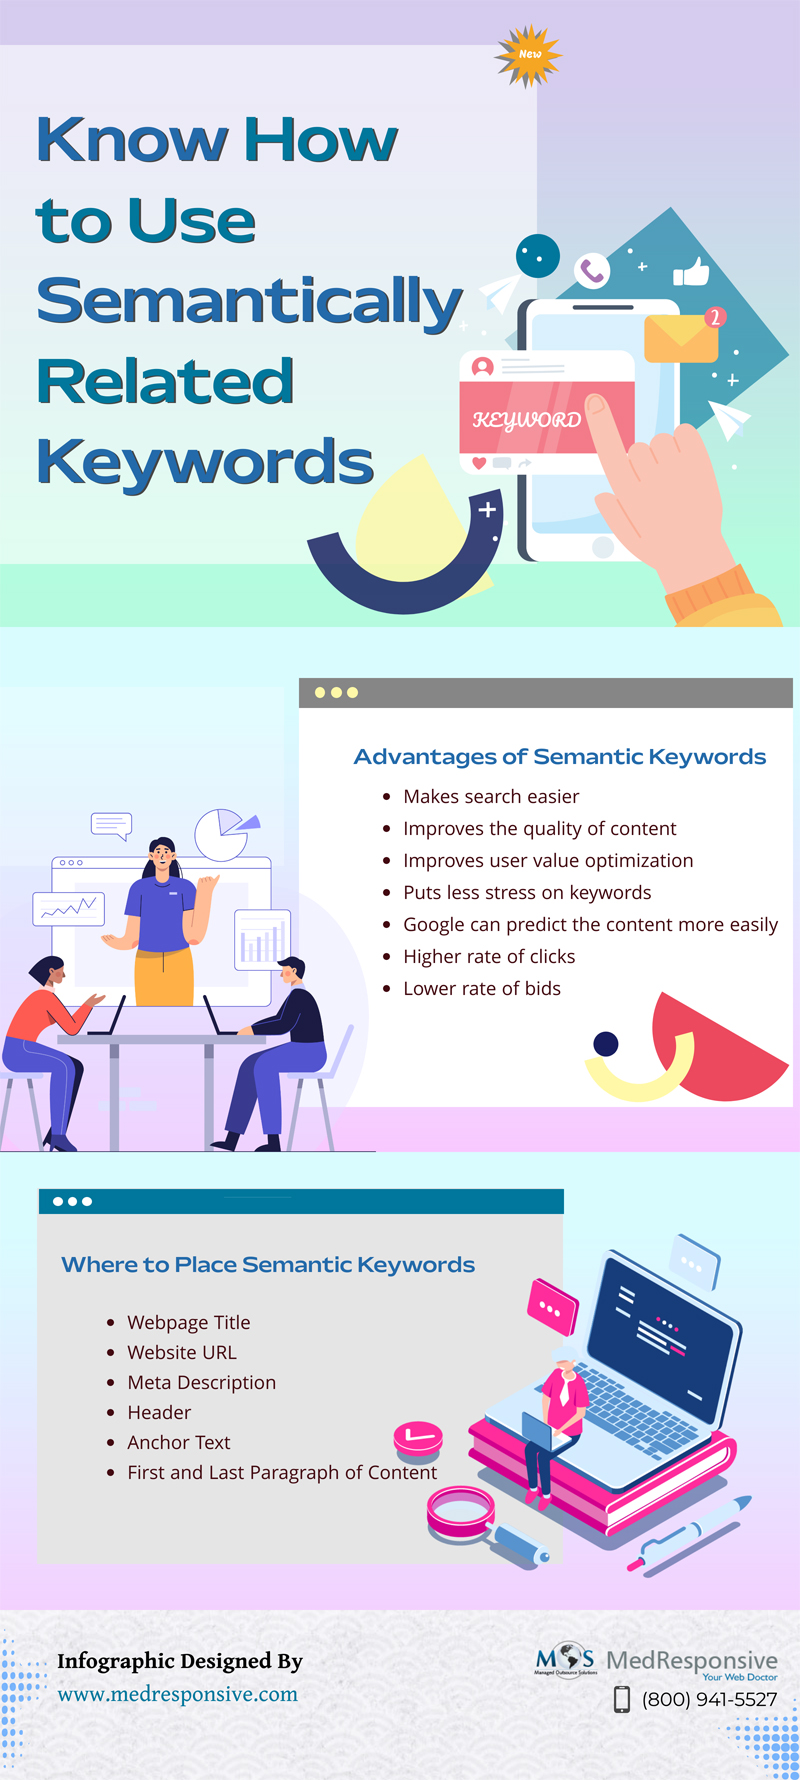 Know How to Use Semantically Related Keywords